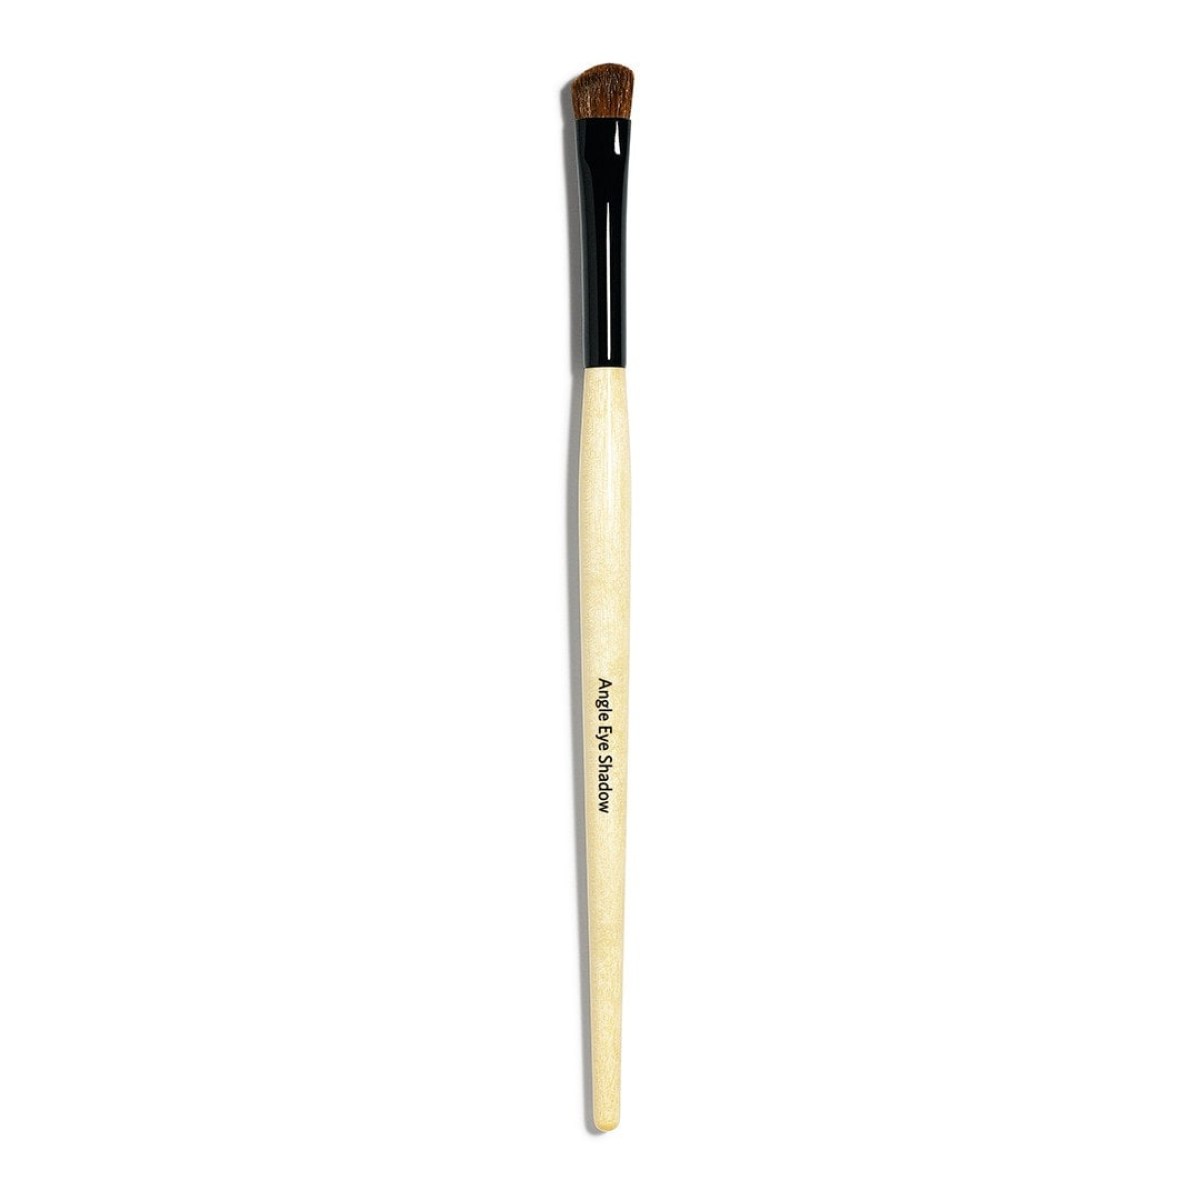 Picture of: Angle Eye Shadow Brush  Bobbi Brown Germany E-commerce Site